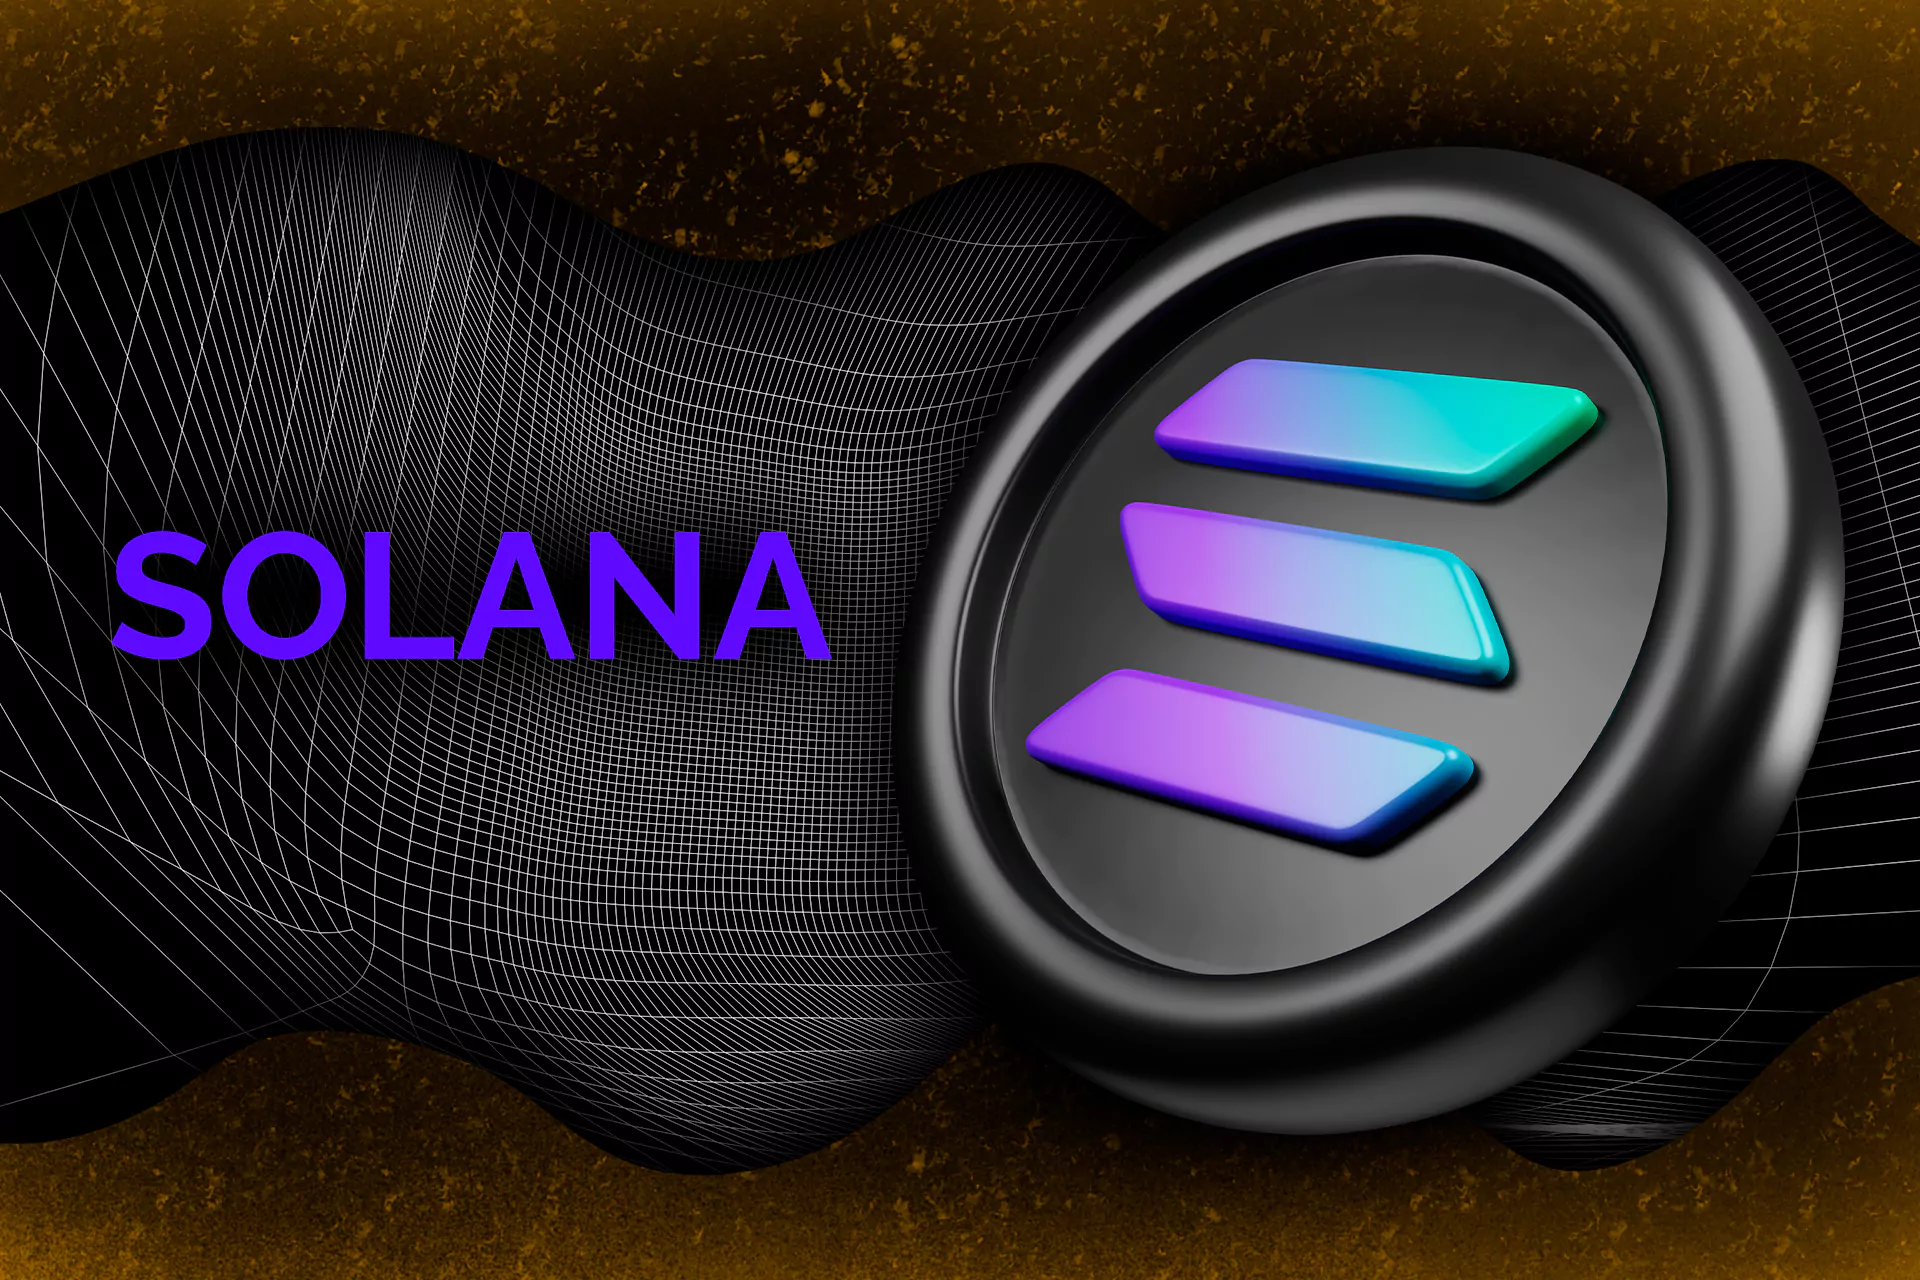 Solana is a young yet popular cryptocurrency.